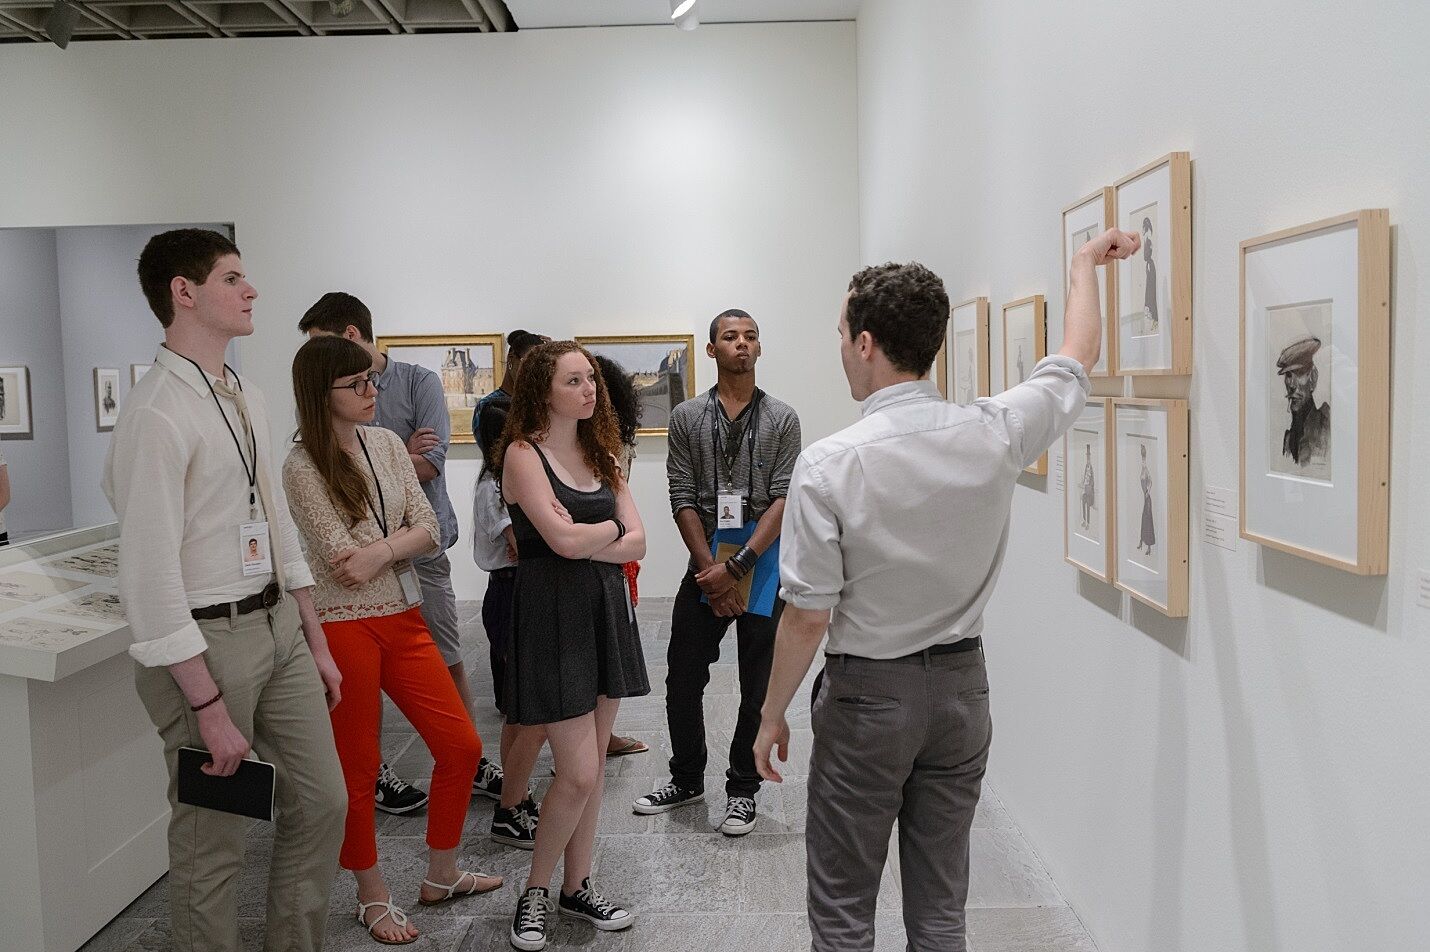 Teens get a tour of the gallery from a museum curator.